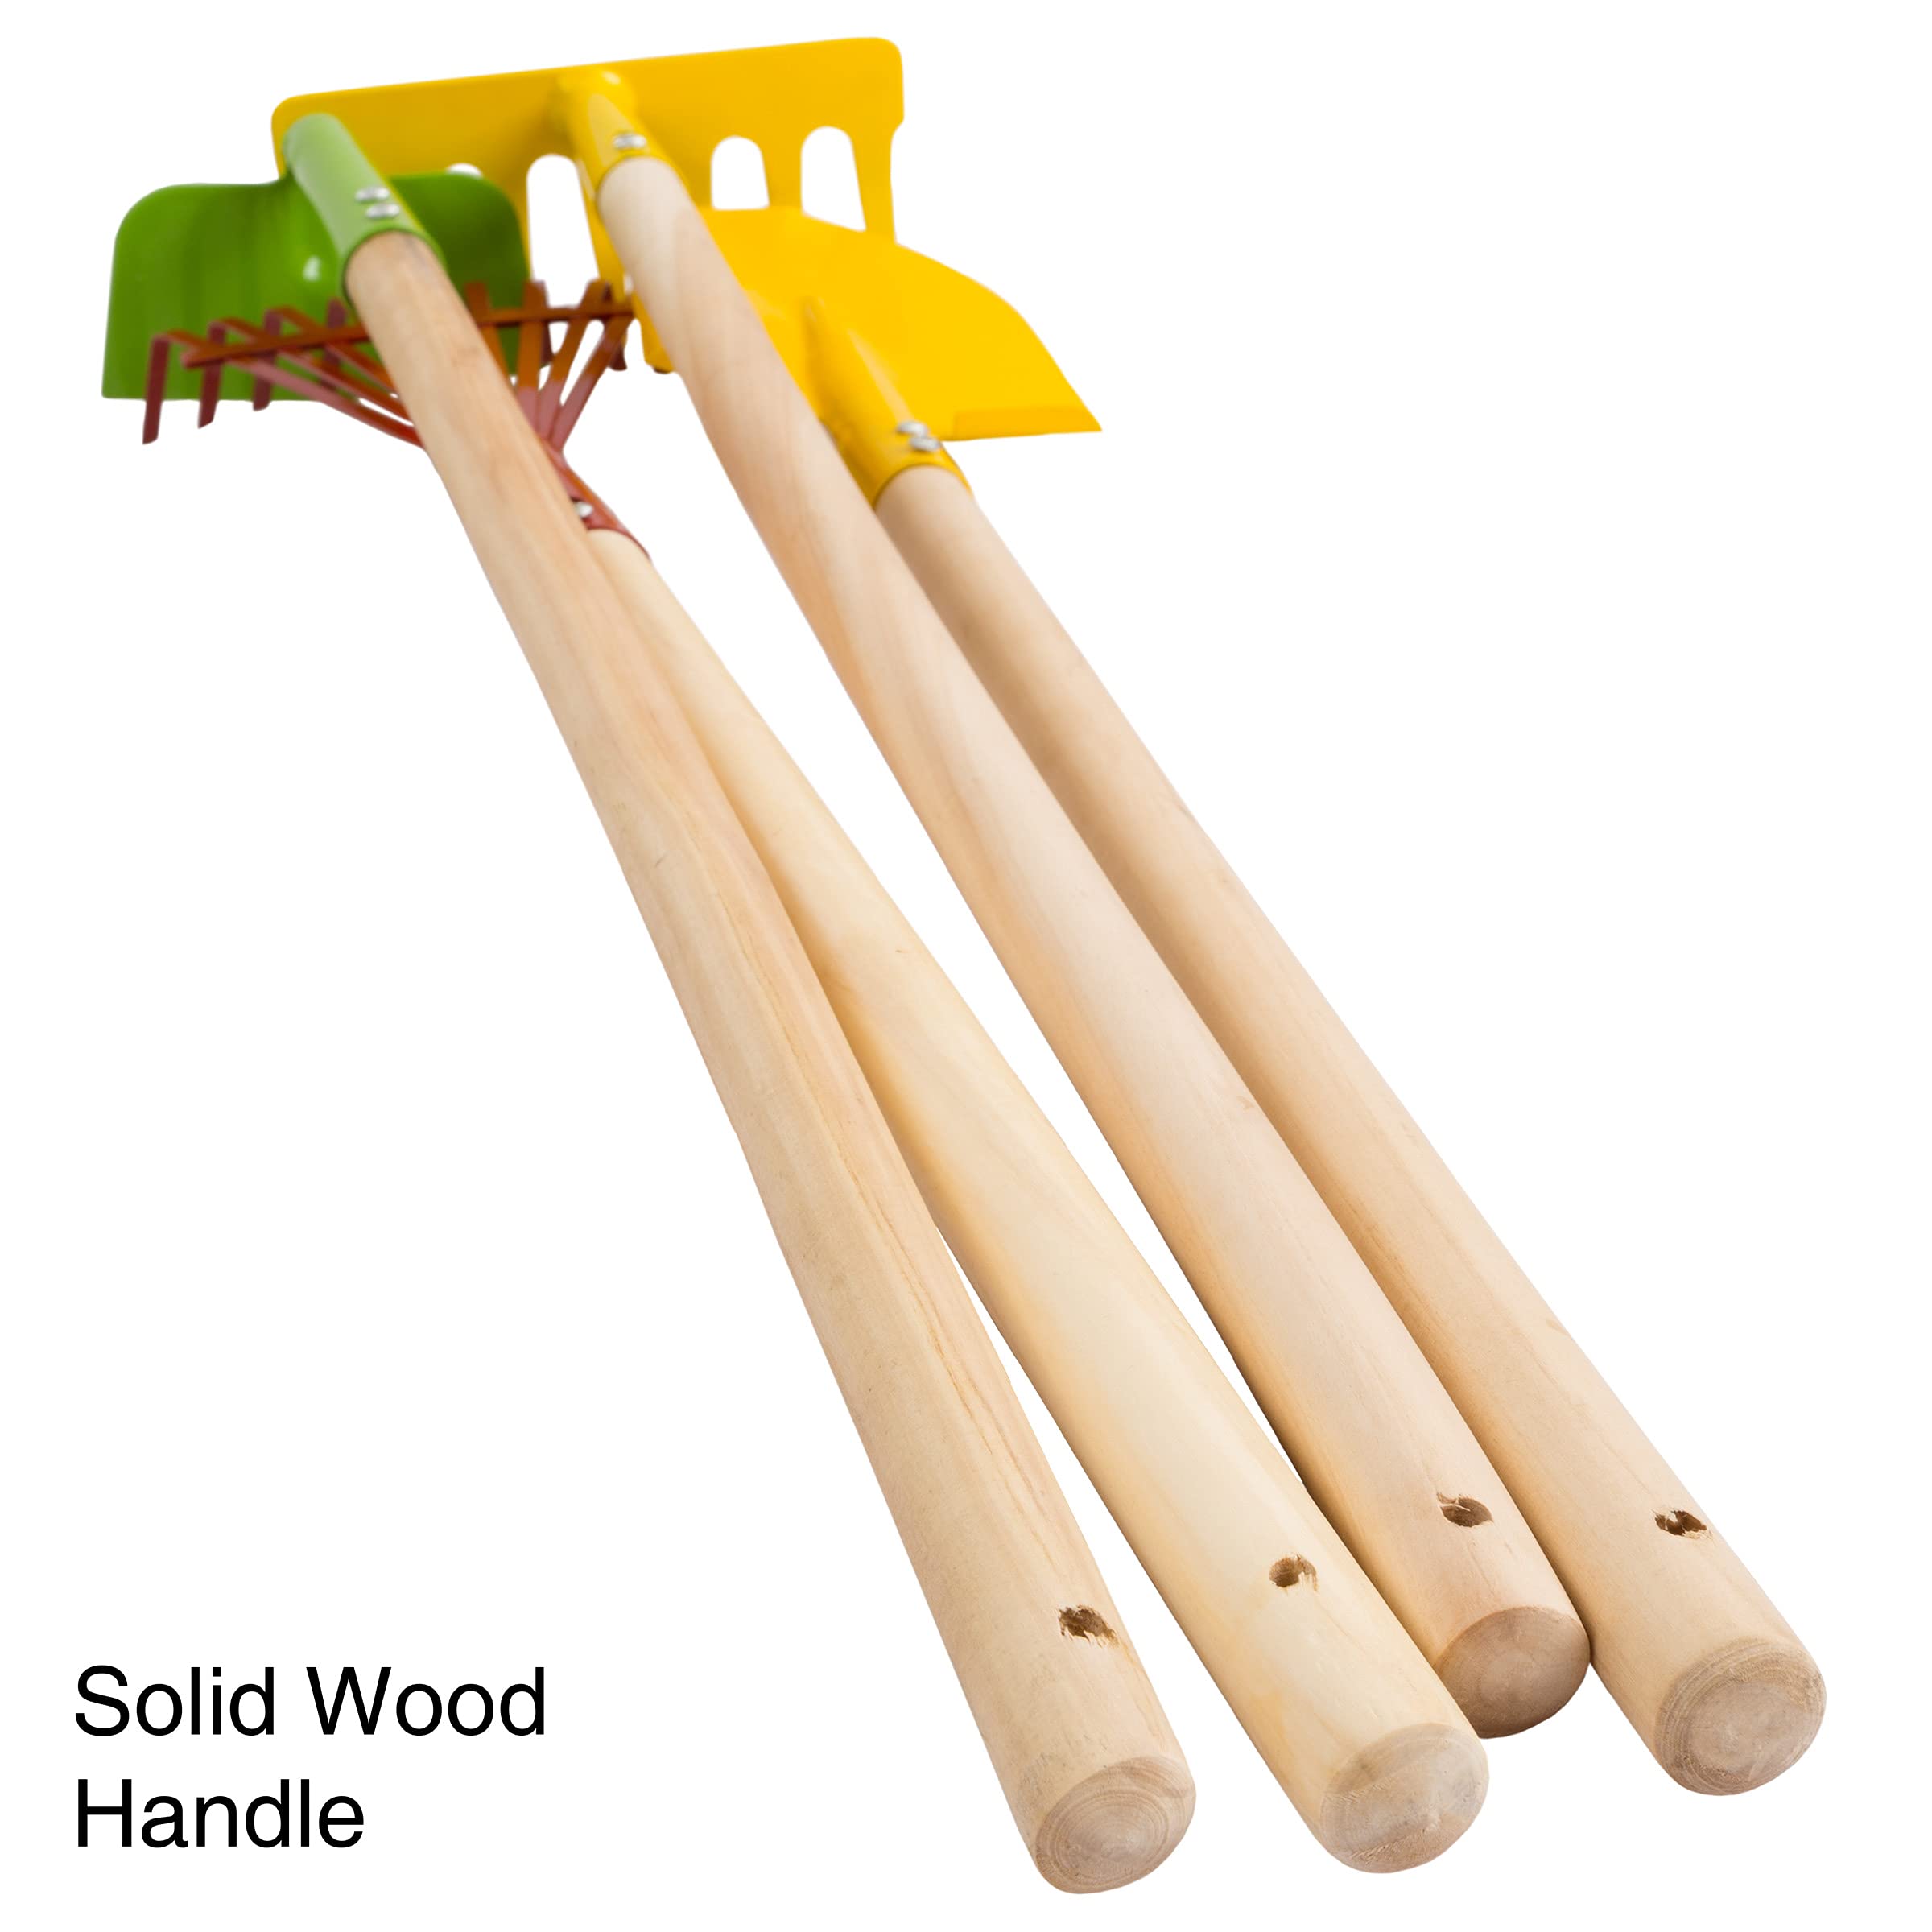 Hey! Play! Kid’s Garden Tool Set with Child Safe Shovel, Rake, Hoe and Leaf Rake– 4 Piece Gardening Kit with Long Wood Handles for Boys and Girls